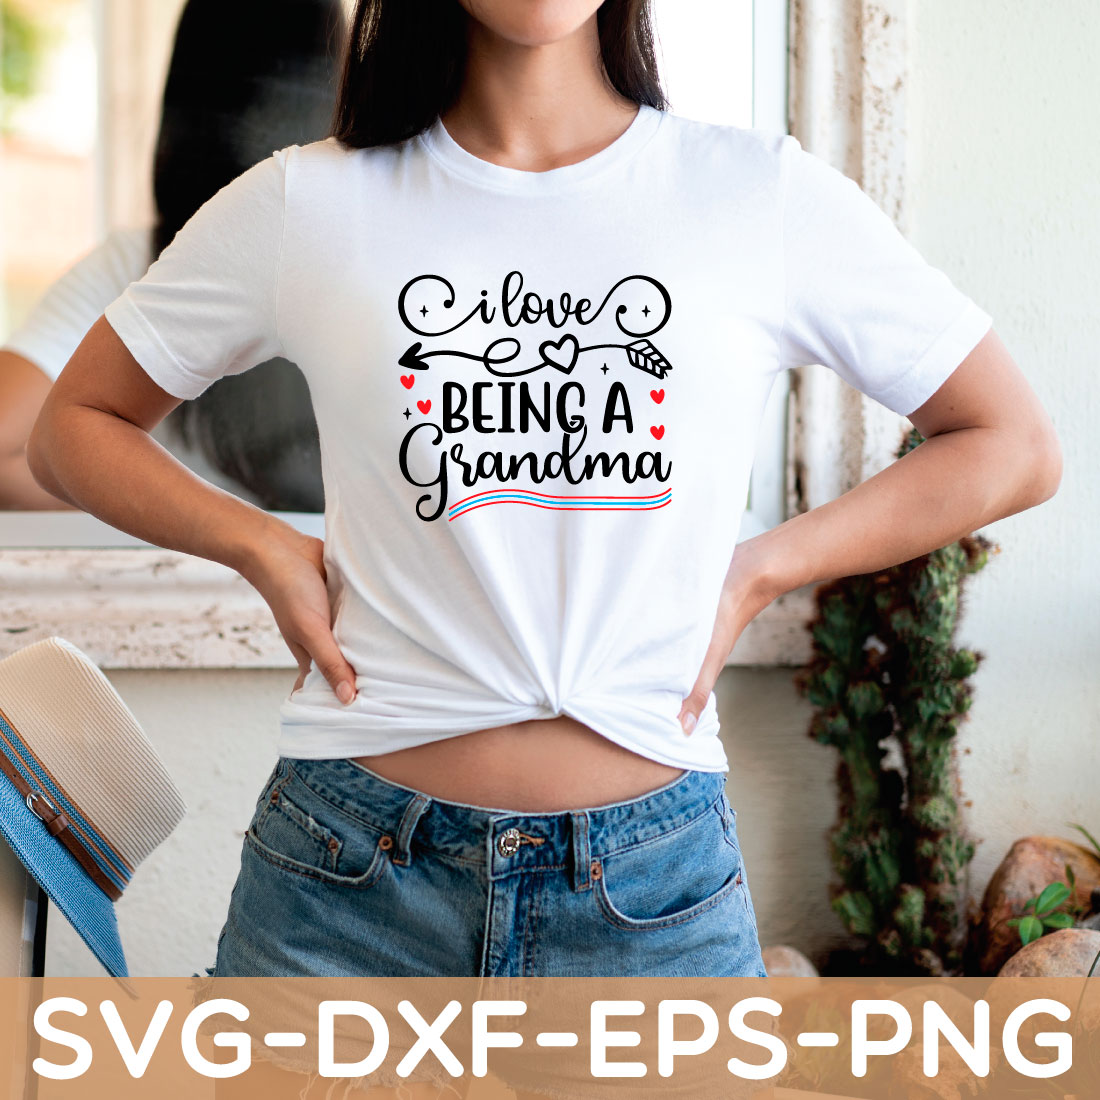 i love being a grandma shirt preview image.